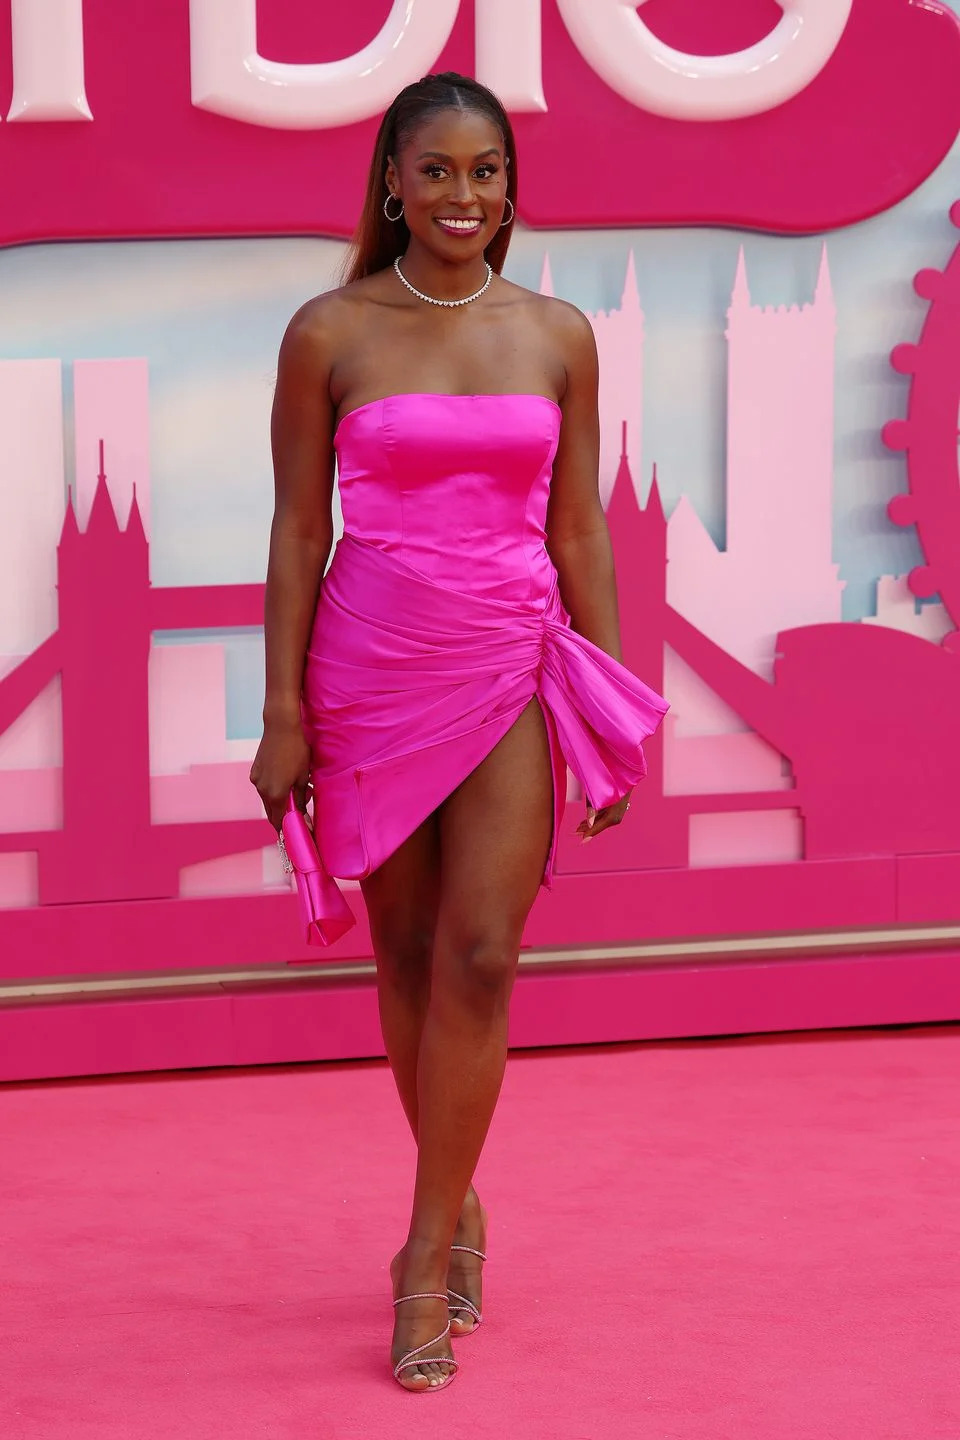 Issa Rae Pops in Pink Miniskirt & Platforms at Barbie London Photocall –  Footwear News